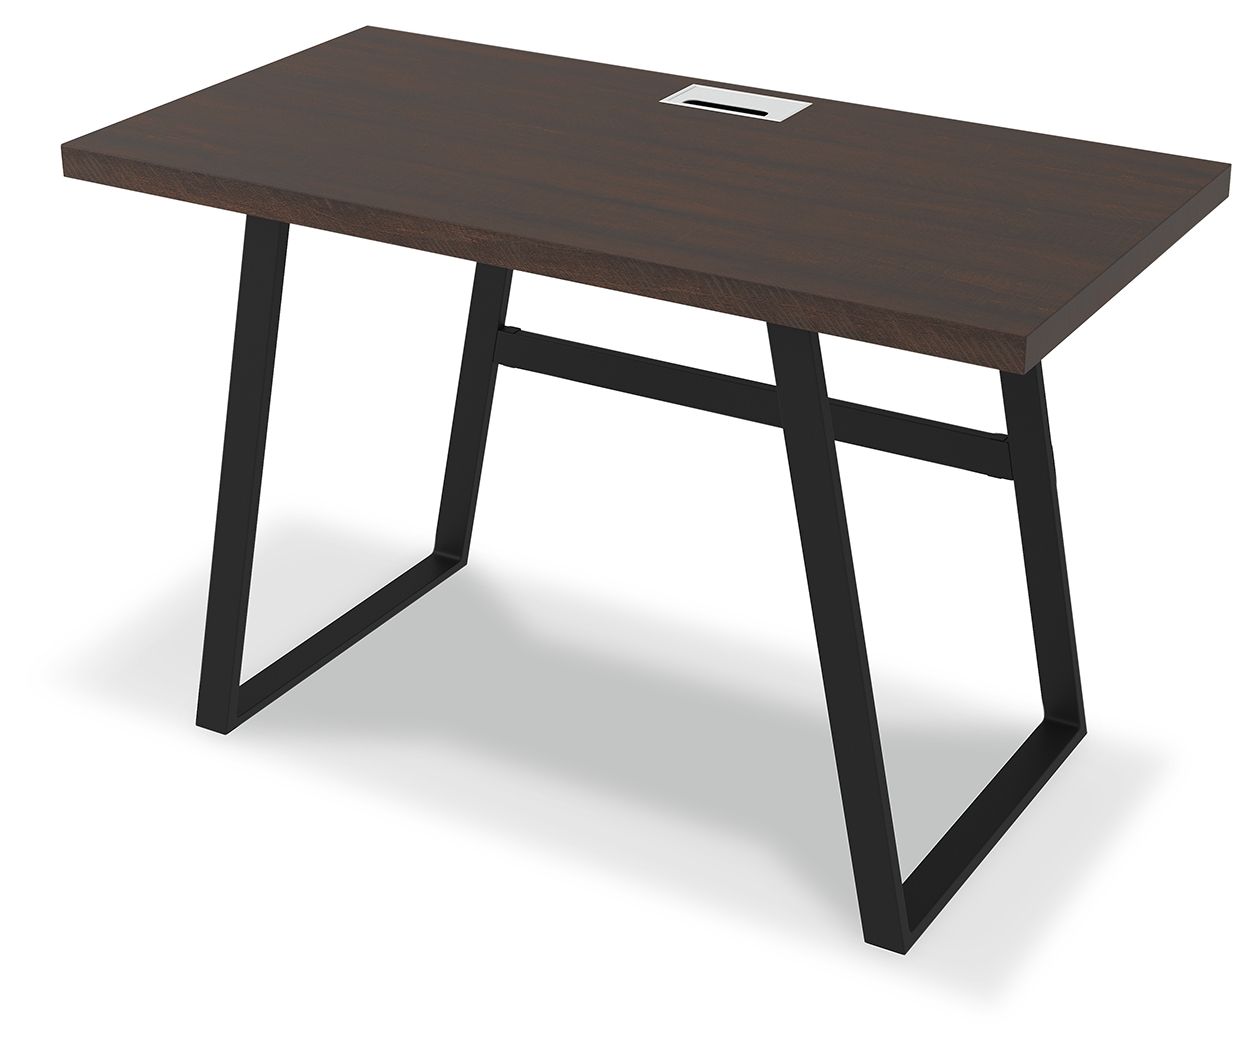 Camiburg - Warm Brown - Home Office Small Desk - Tony's Home Furnishings